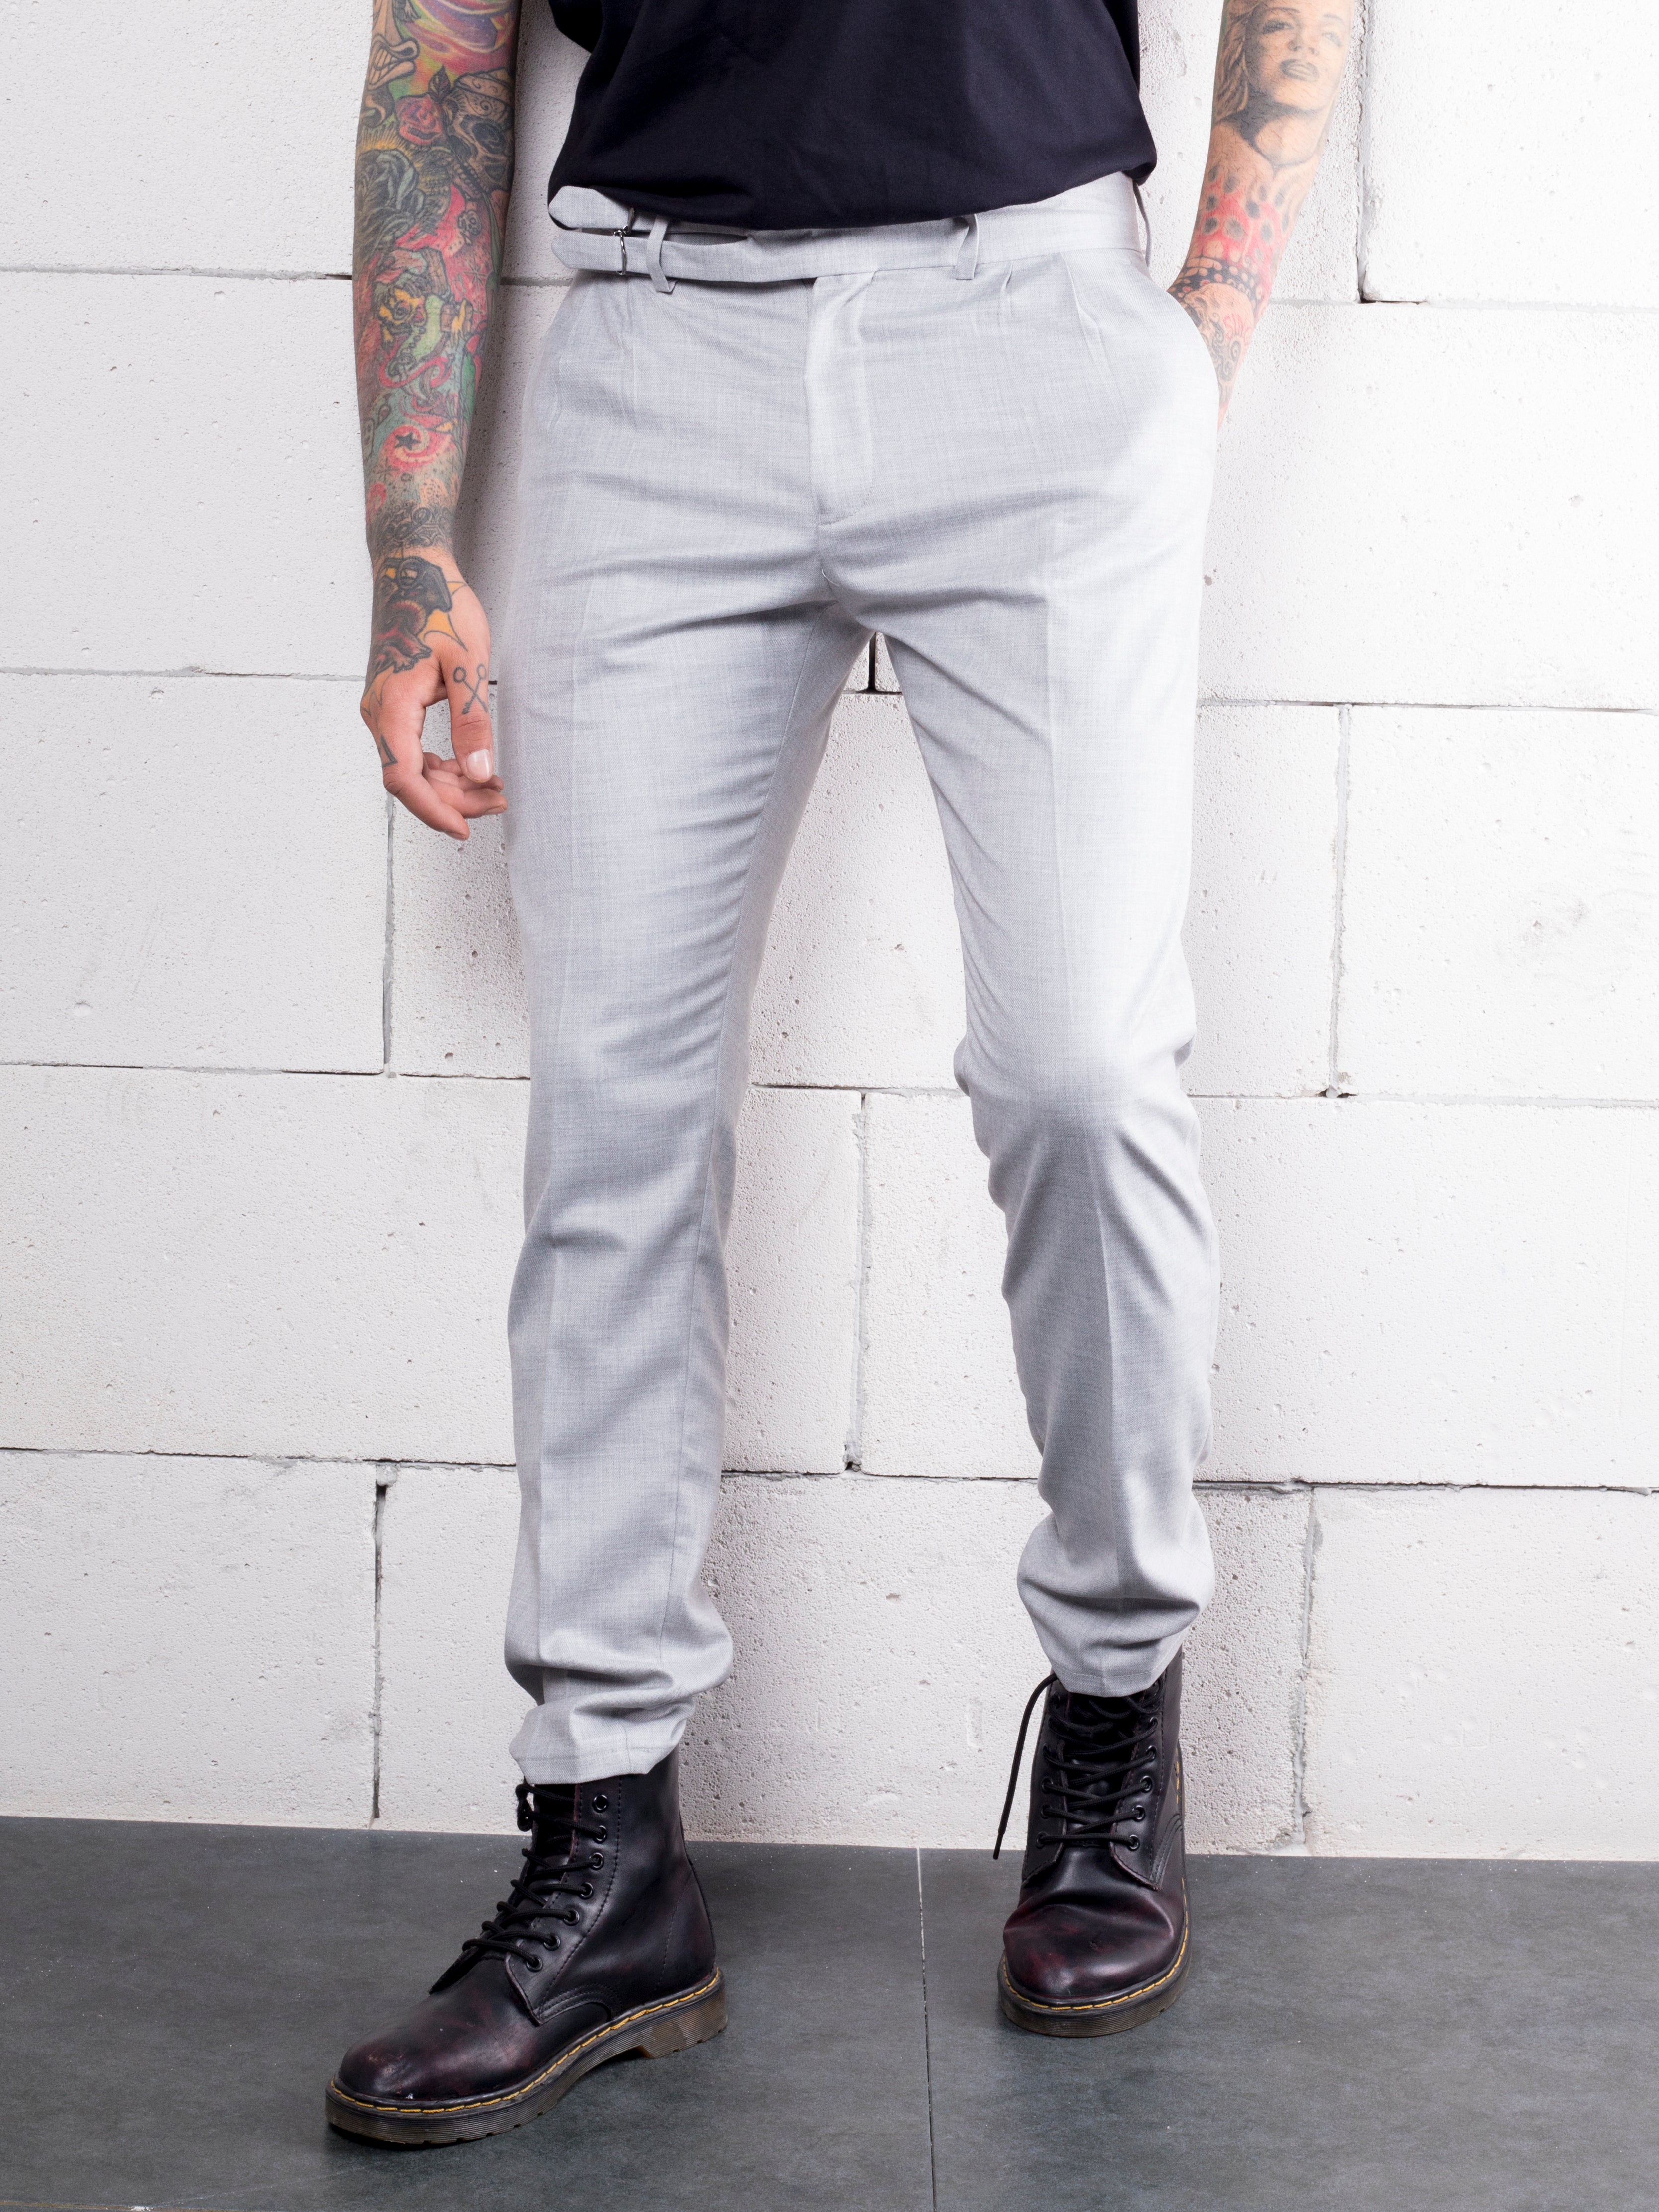 A man with tattoos is standing next to a wall, wearing Granite Pants made from Premium Italian fabric.